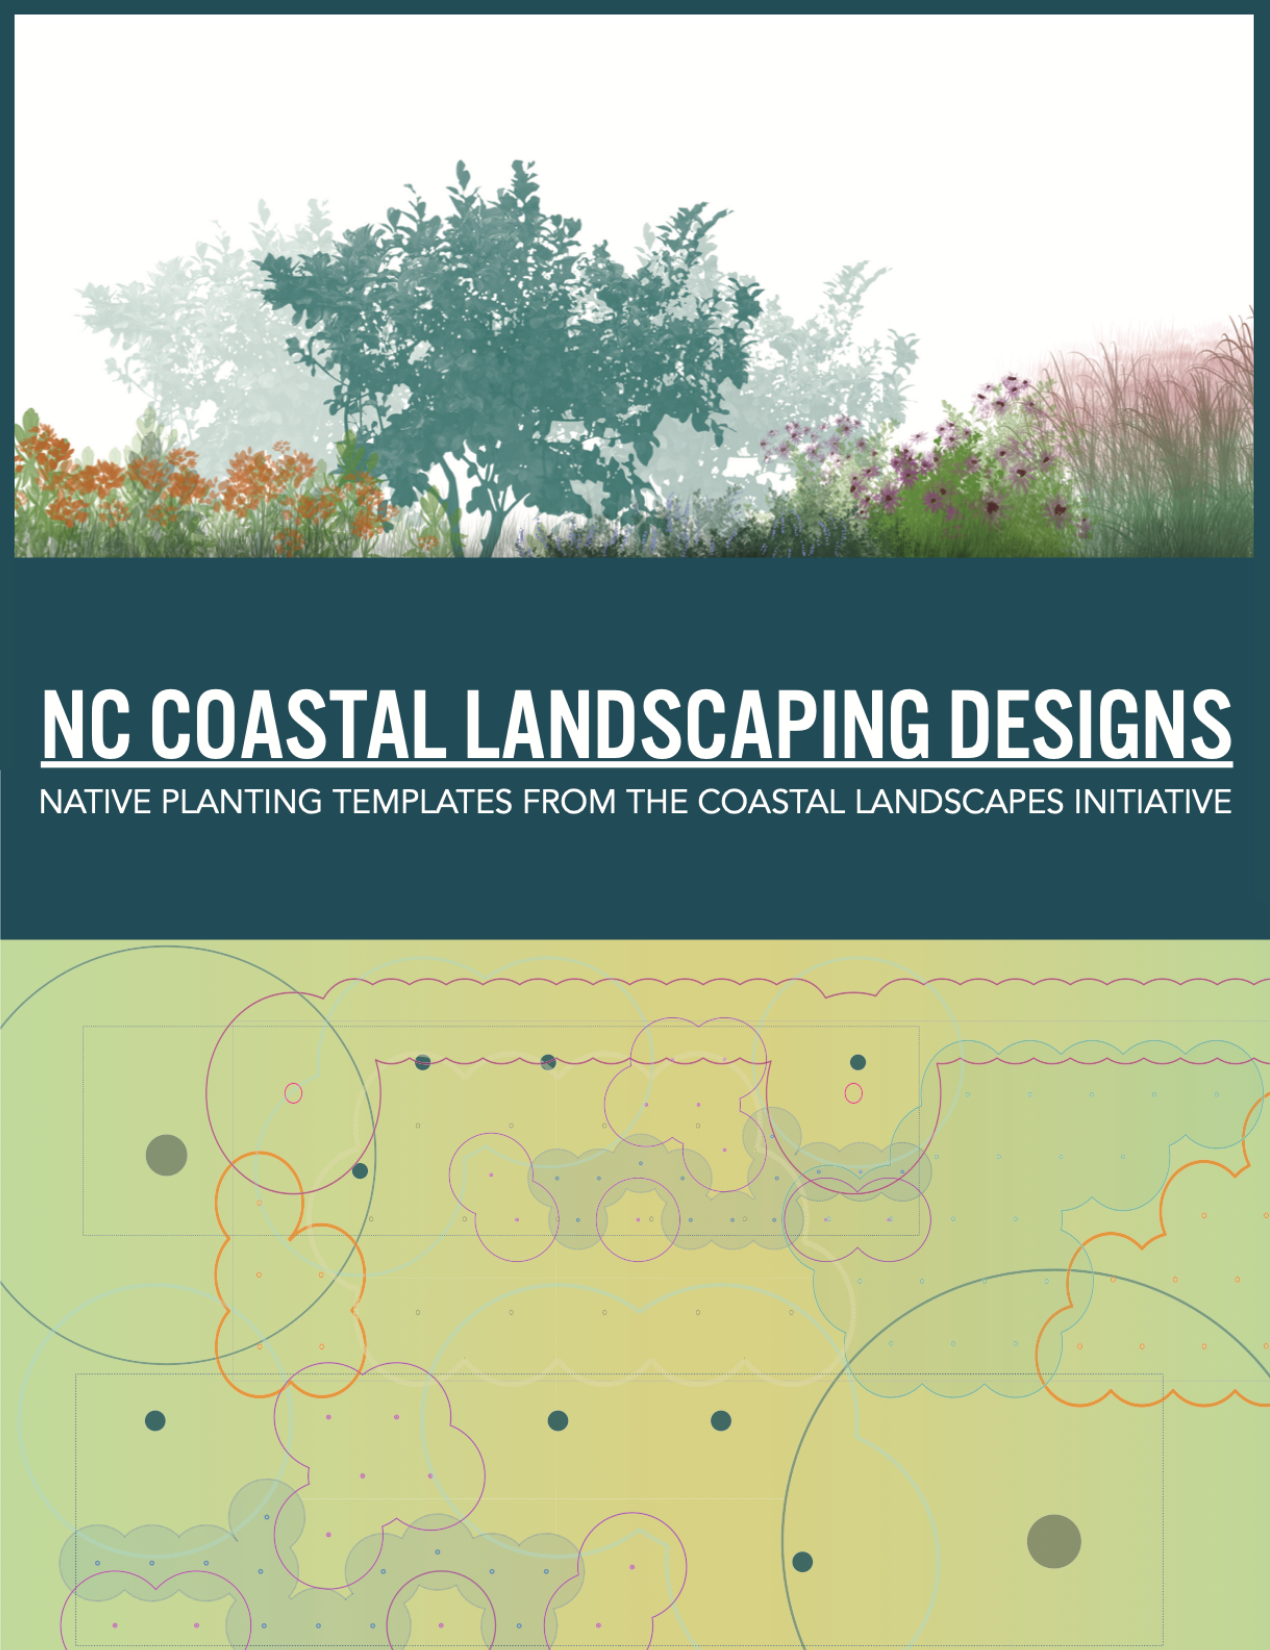 An image of the front cover of the NC Coastal Landscaping Design series